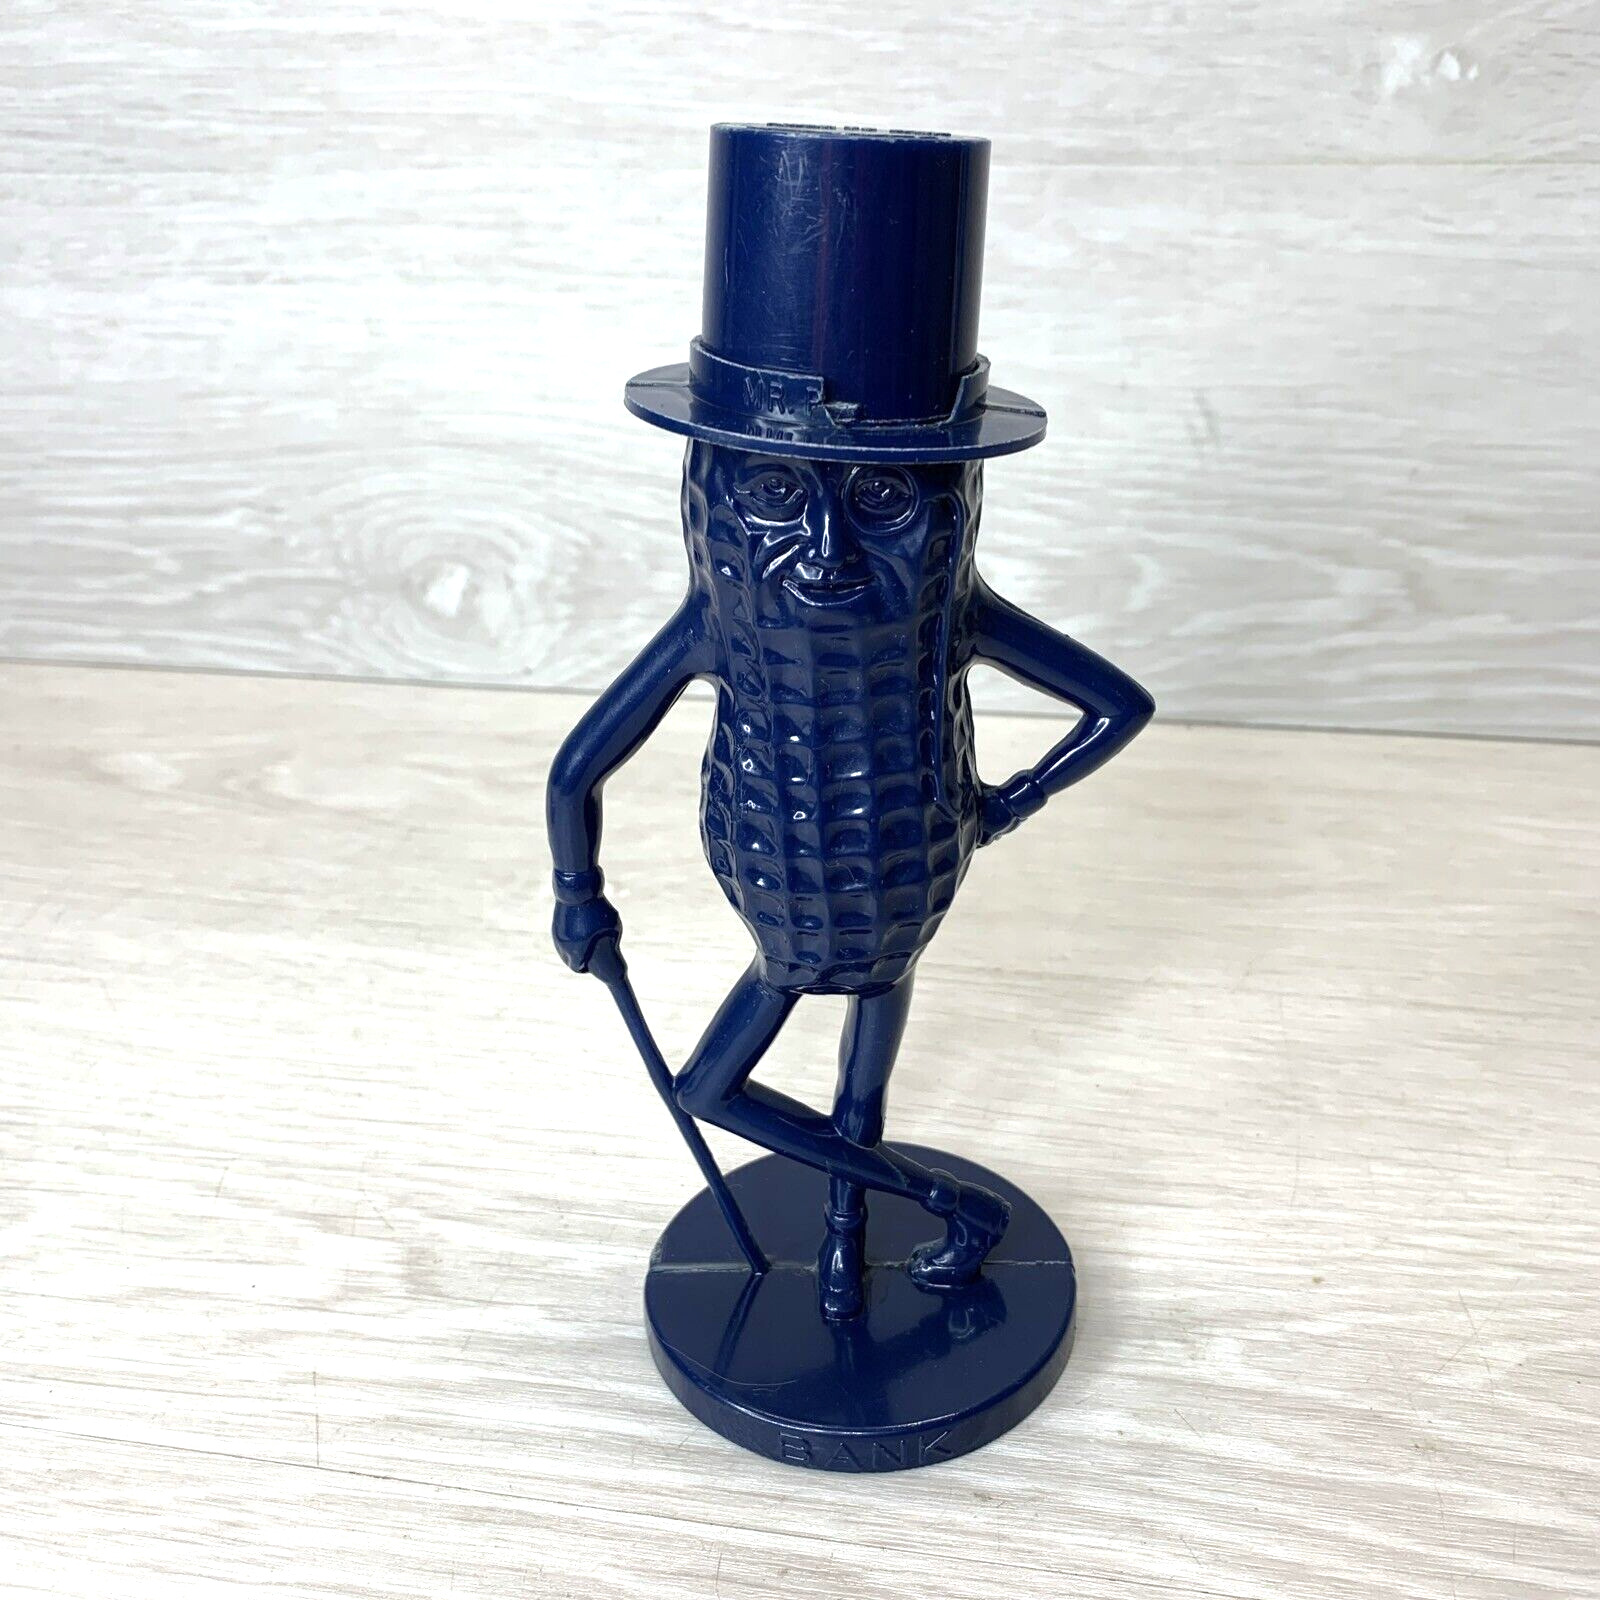 Mr. Peanut Plastic Coin Bank Collectible Made in the USA Dark Navy Blue